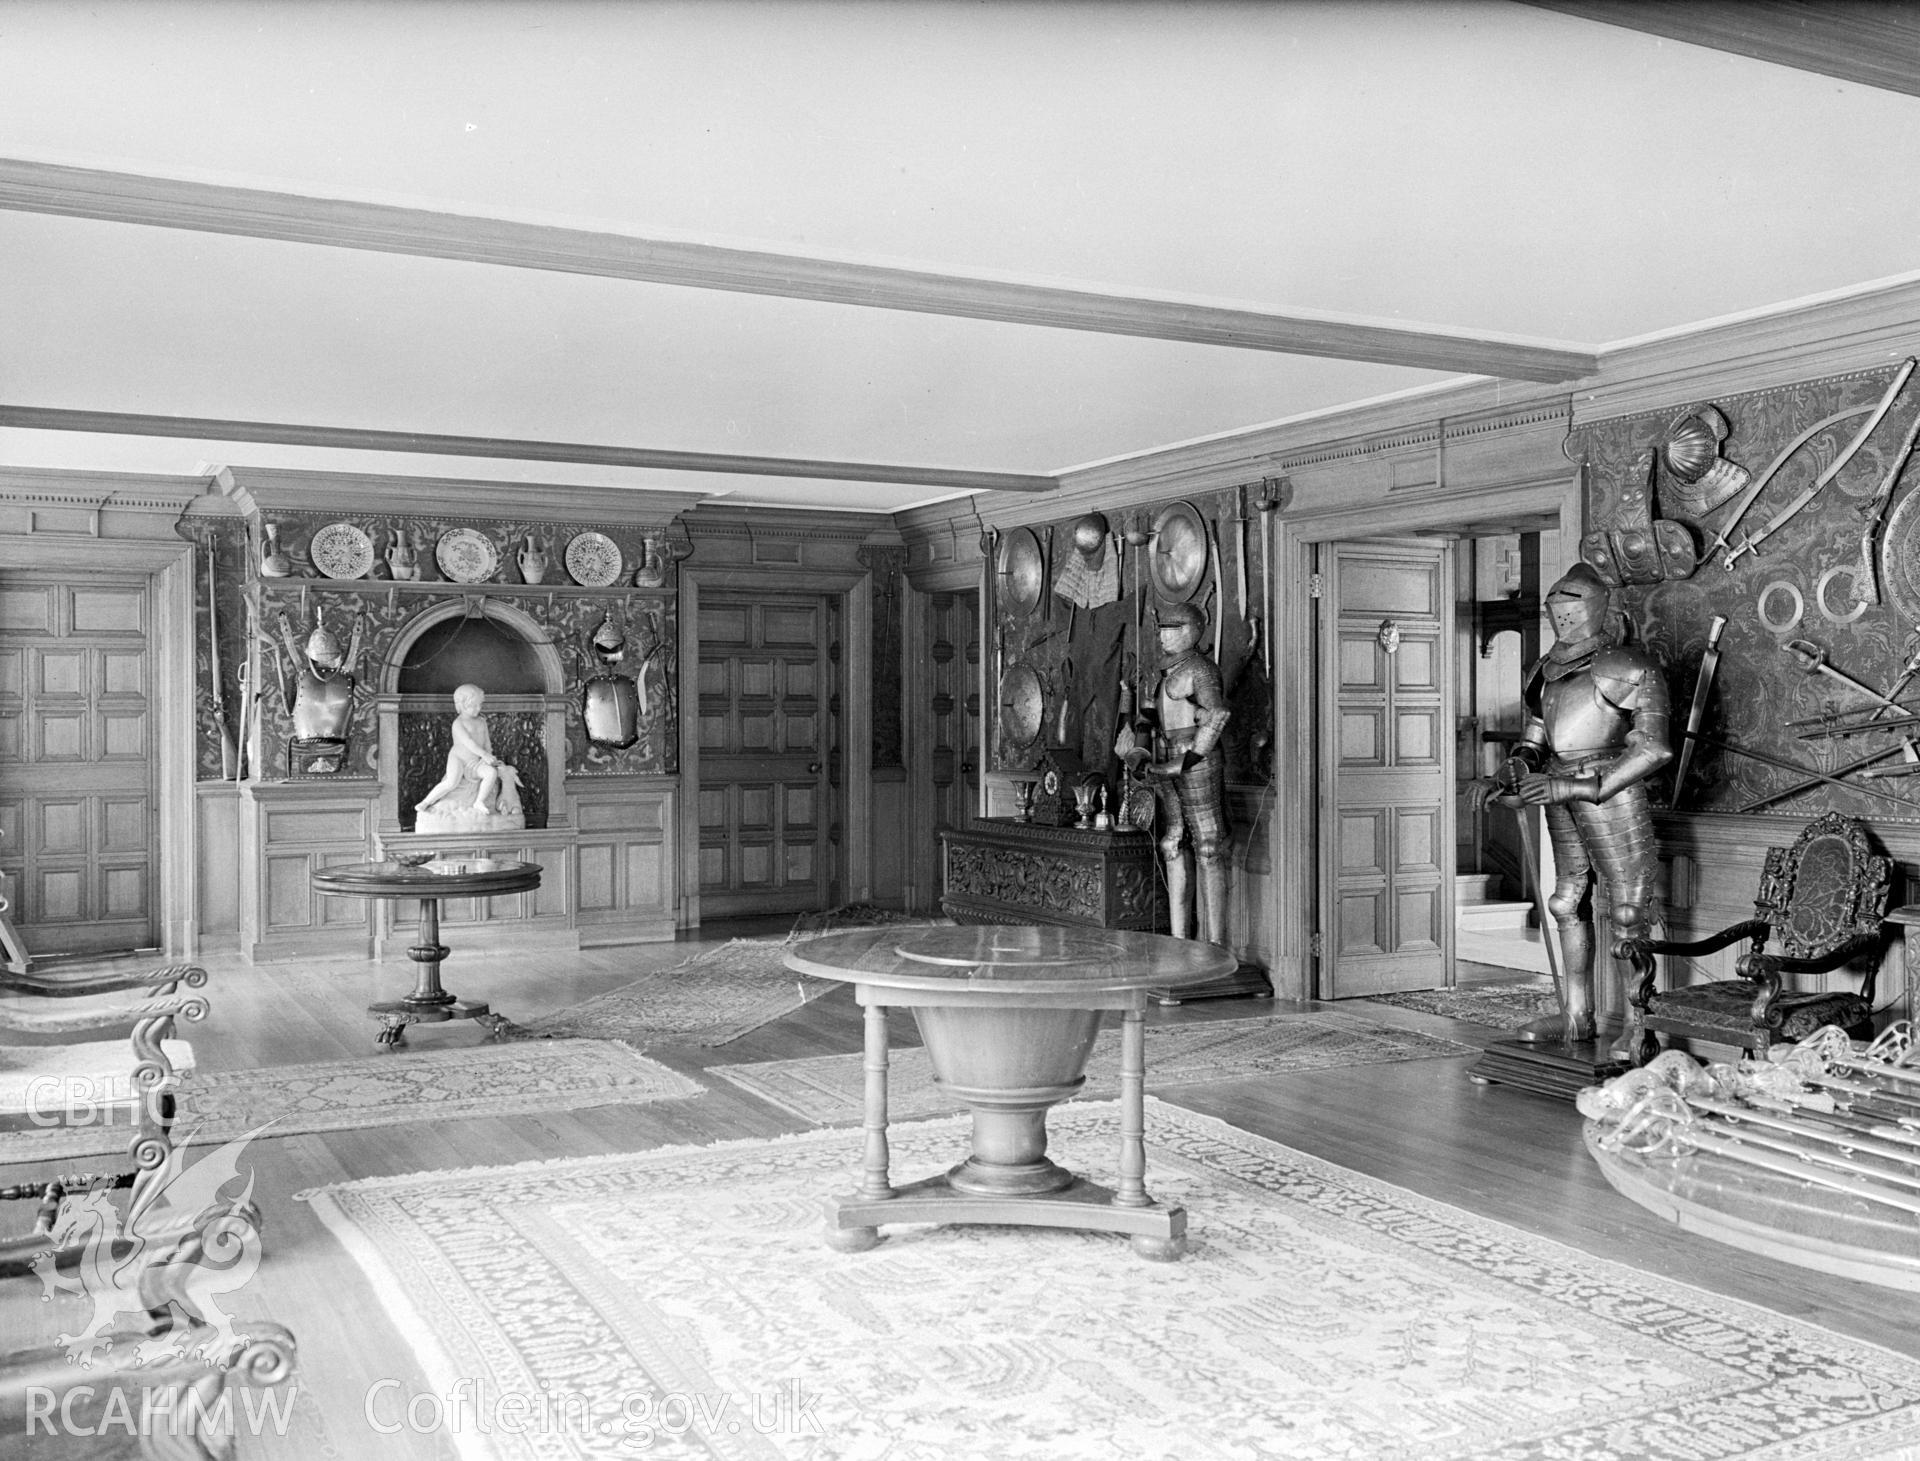 The west entrance of the Hall. With wood panelled walls and a wooden flooring.